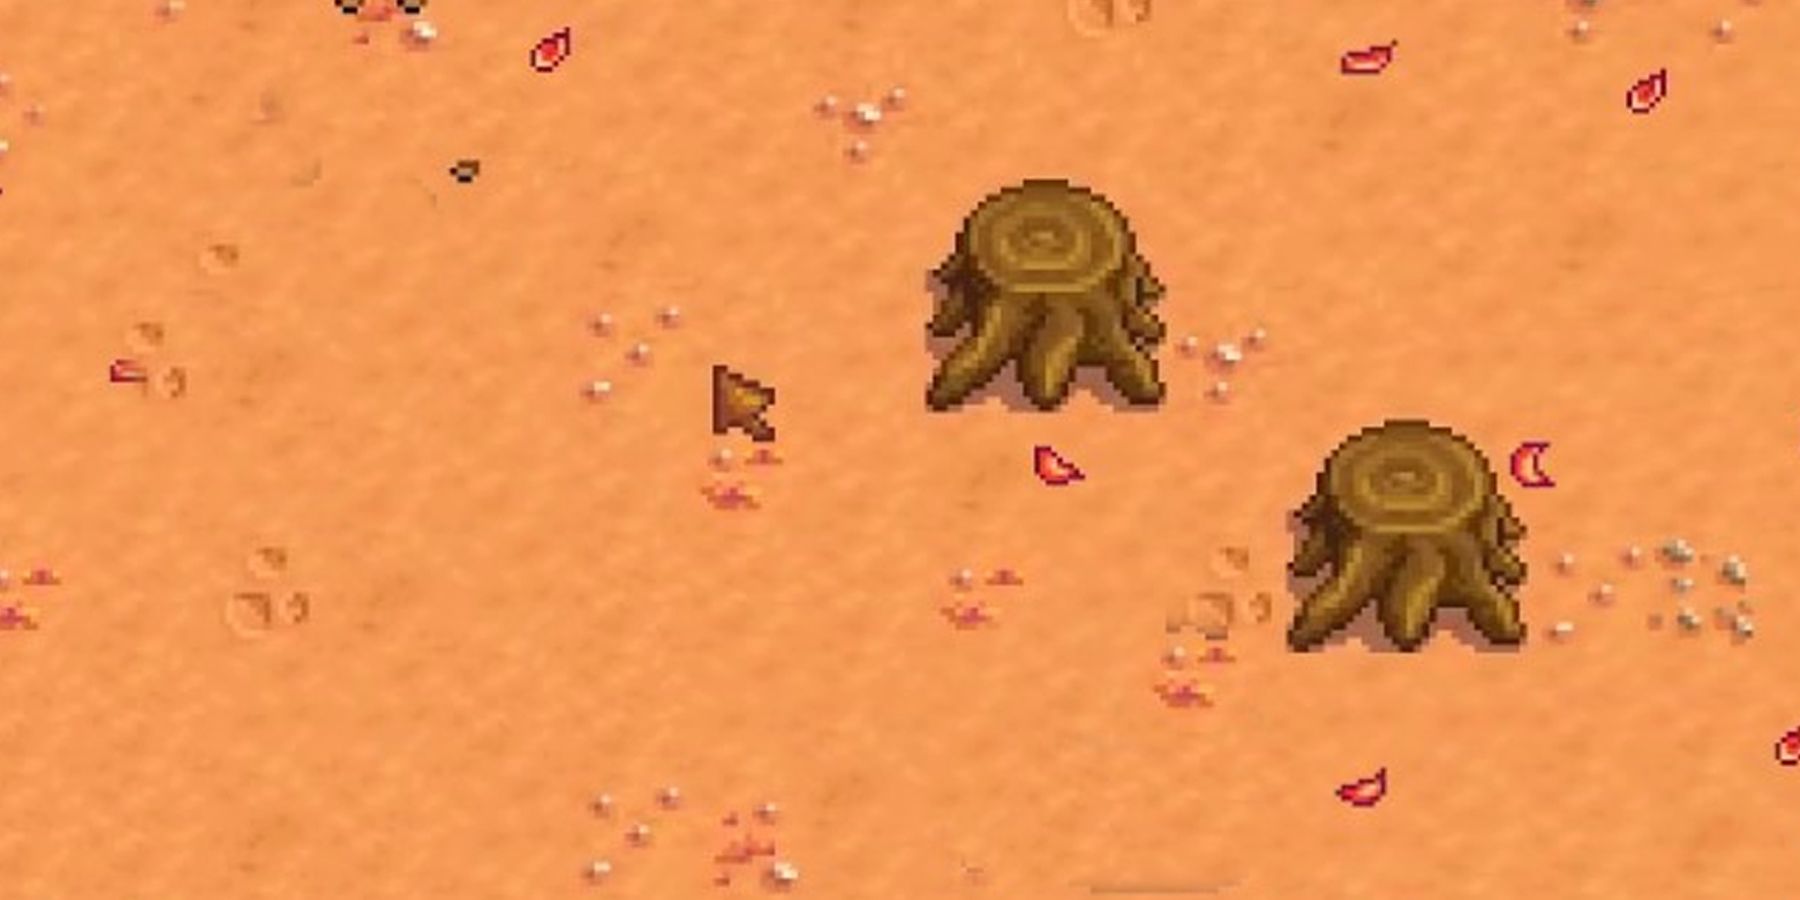 An area with Large Stumps in Stardew Valley